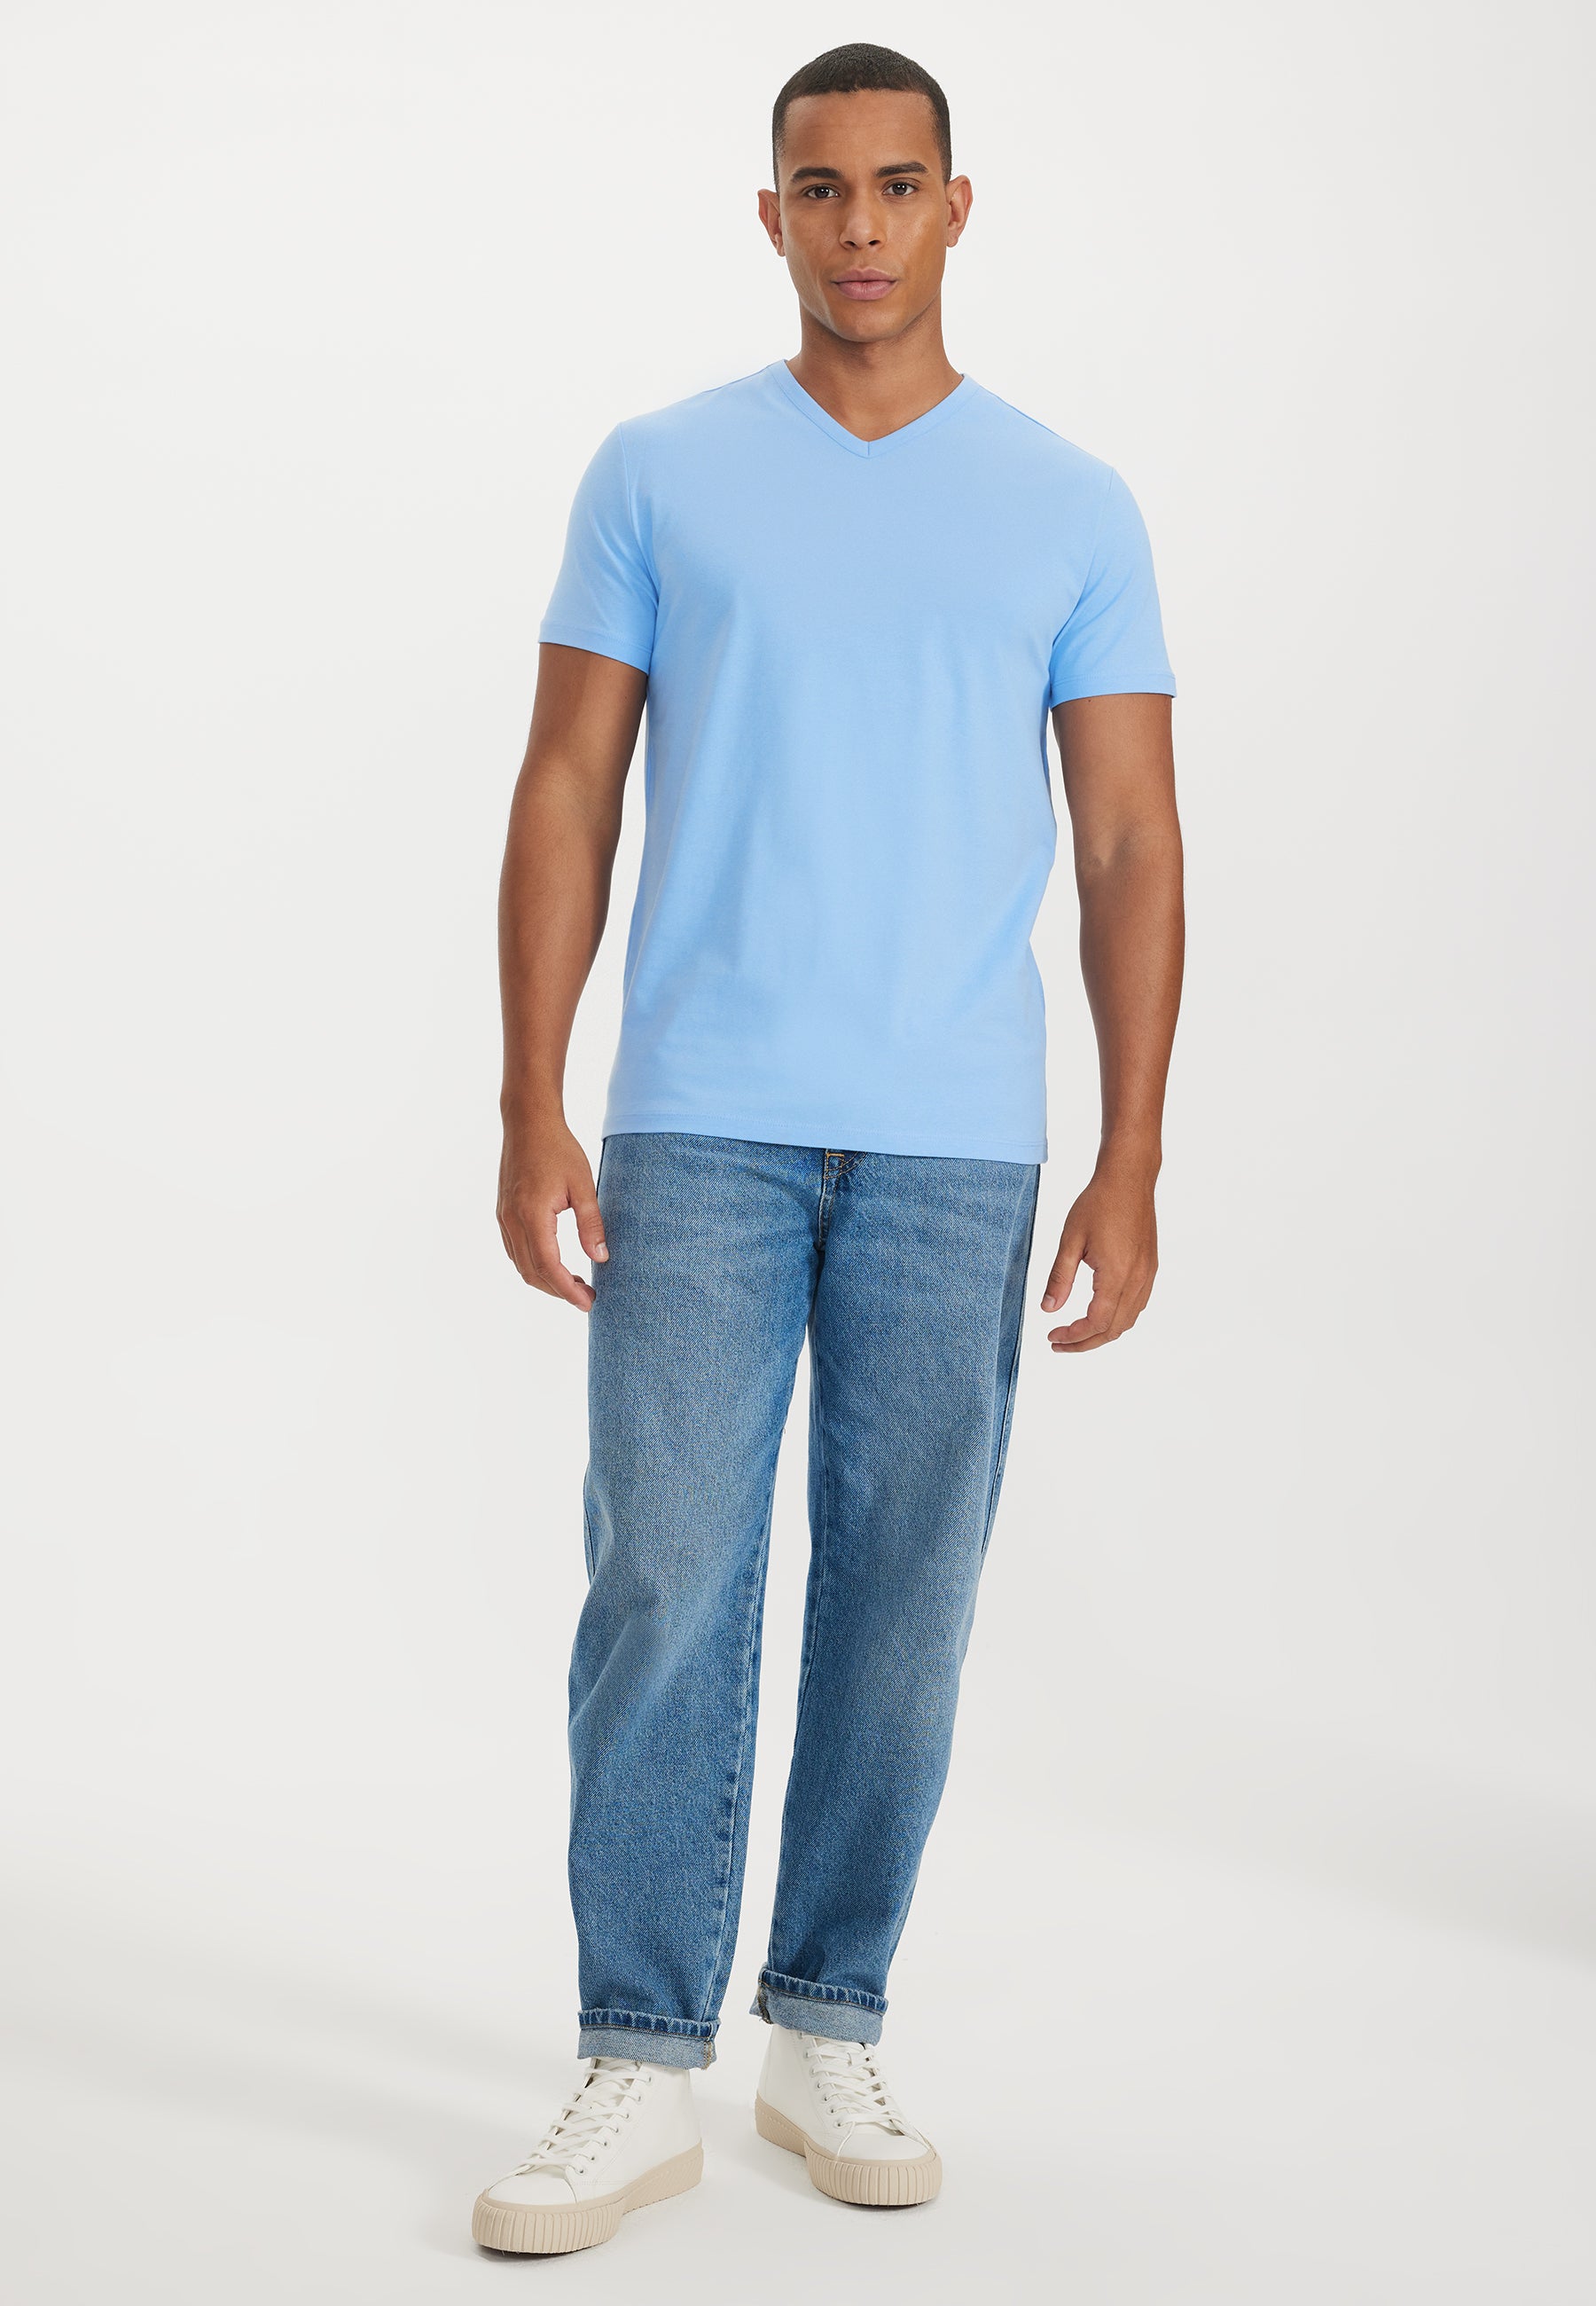 THEO V-NECK TEE in Blue